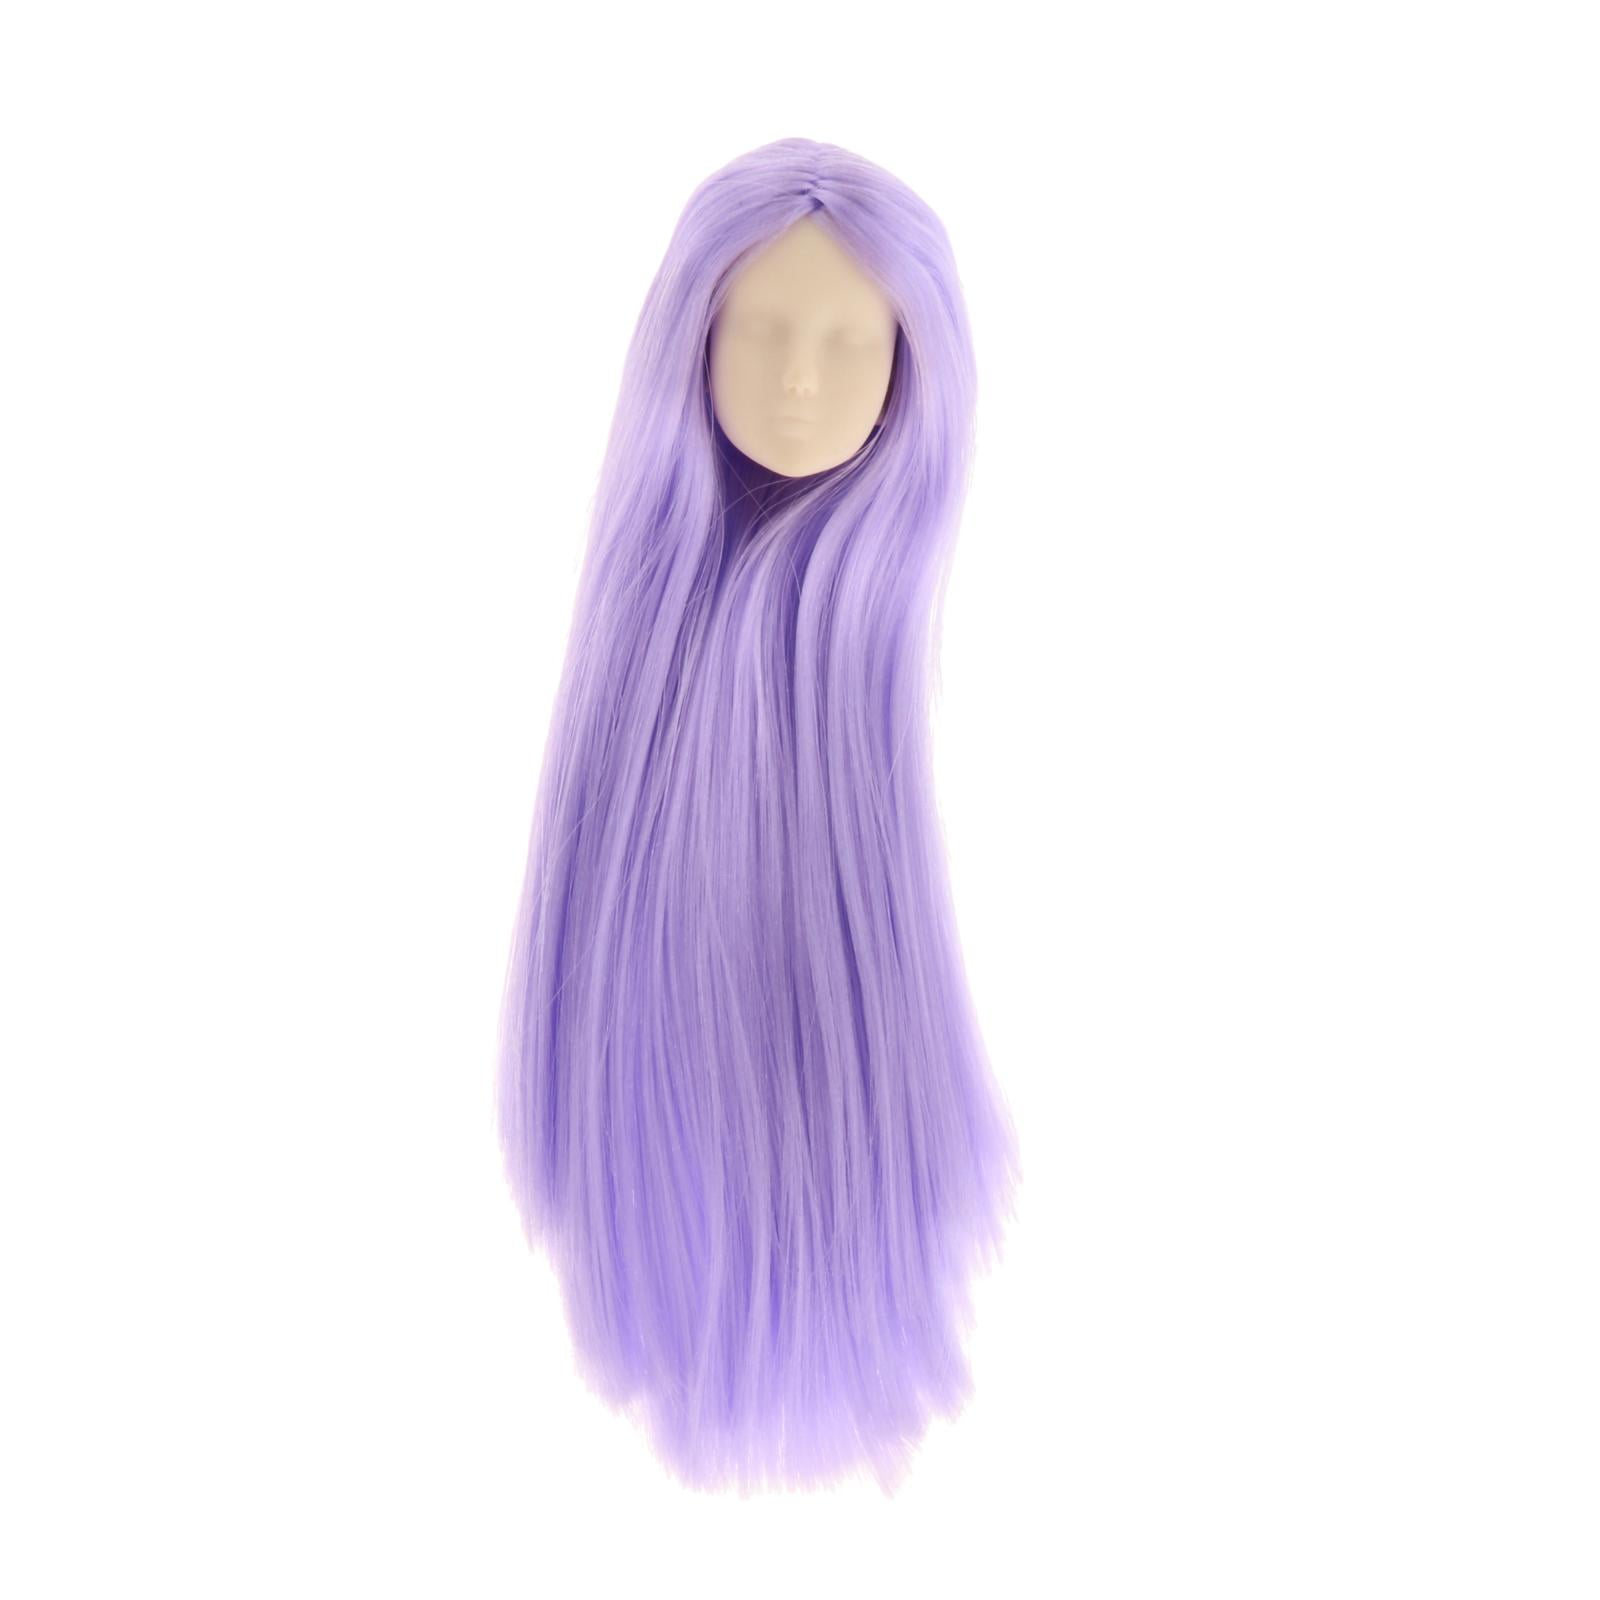 1/6 Beauty Lady Hairpiece Long Straight Purple Hair for 12'' Dolls Making Supply 